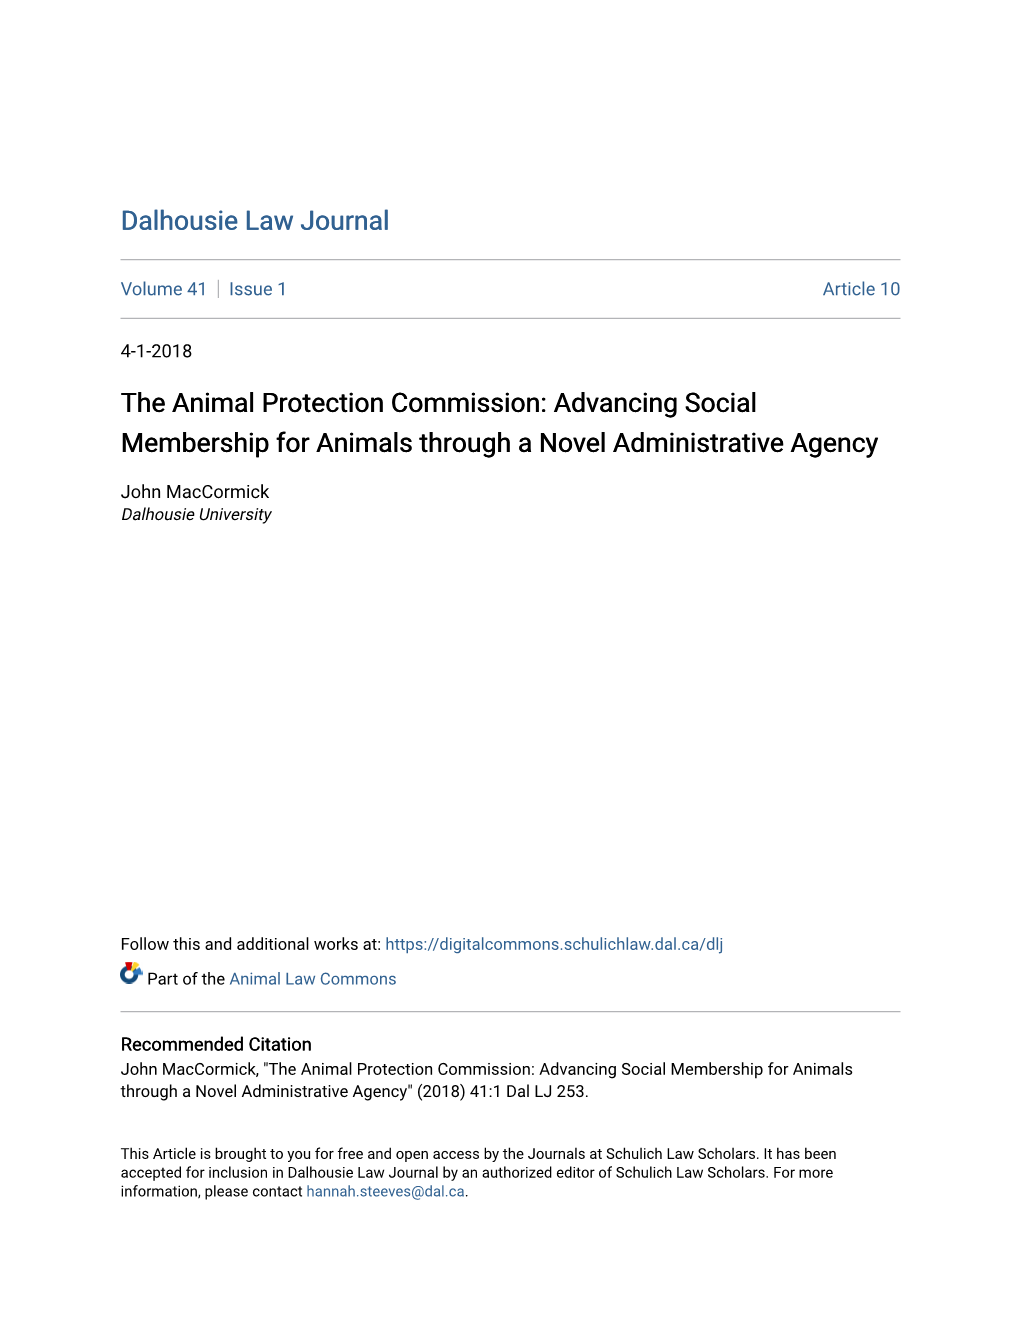 The Animal Protection Commission: Advancing Social Membership for Animals Through a Novel Administrative Agency